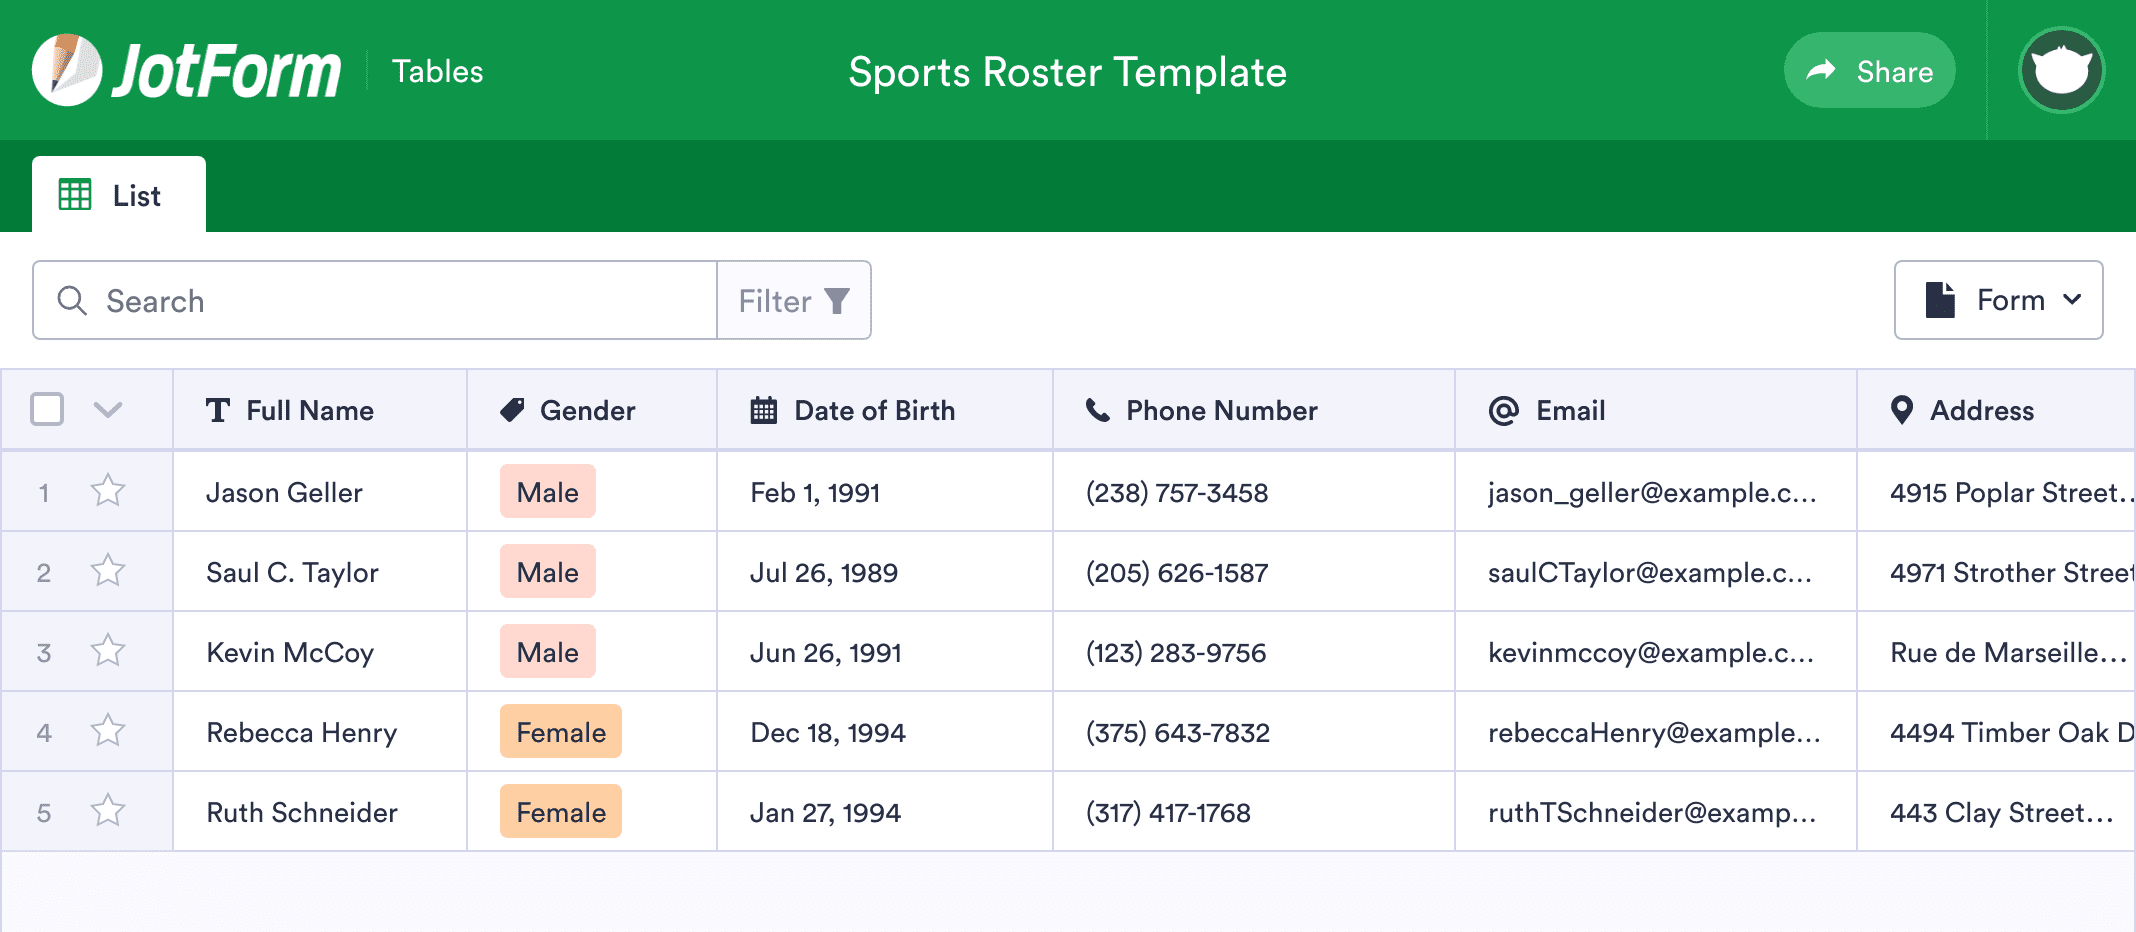 sports-roster-template-jotform-tables